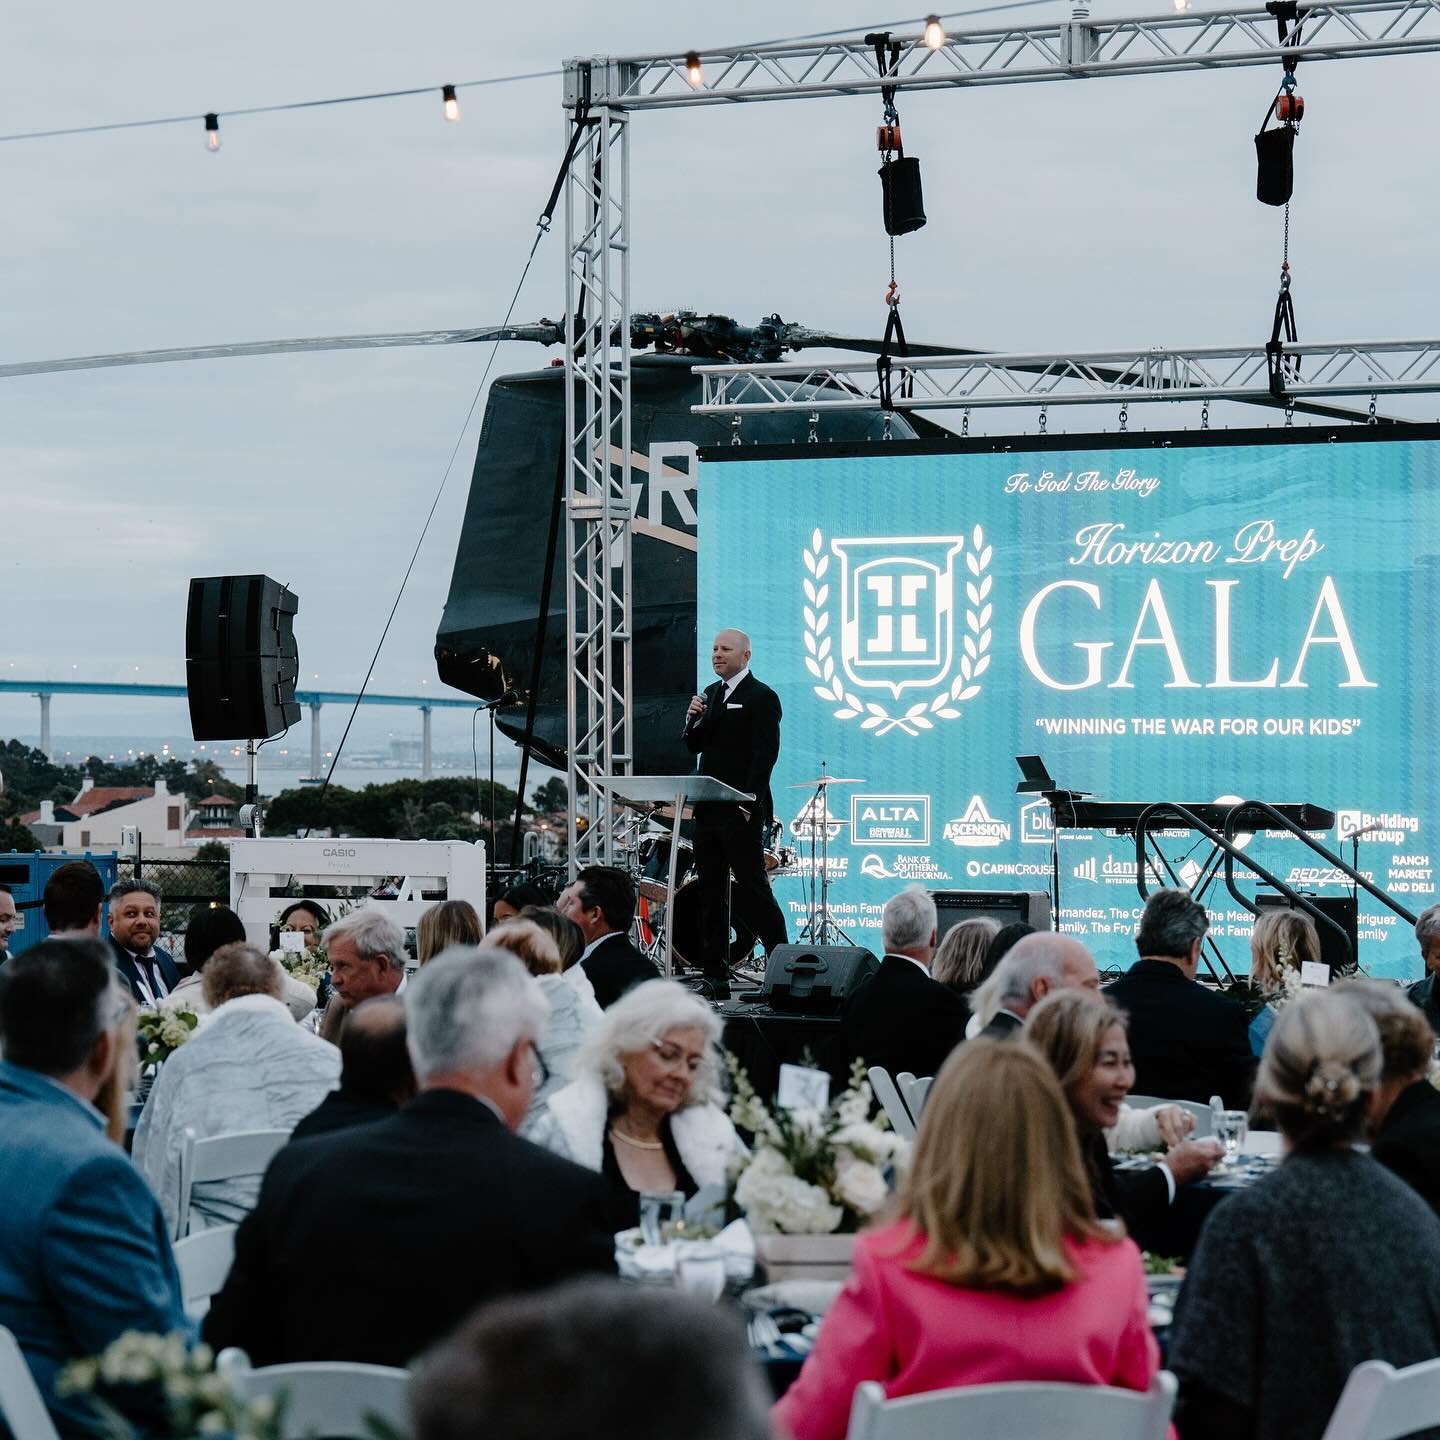 We&rsquo;re still celebrating the amazing night of vision and investment that took place at the Horizon Prep Gala down on the USS Midway. To God the glory!